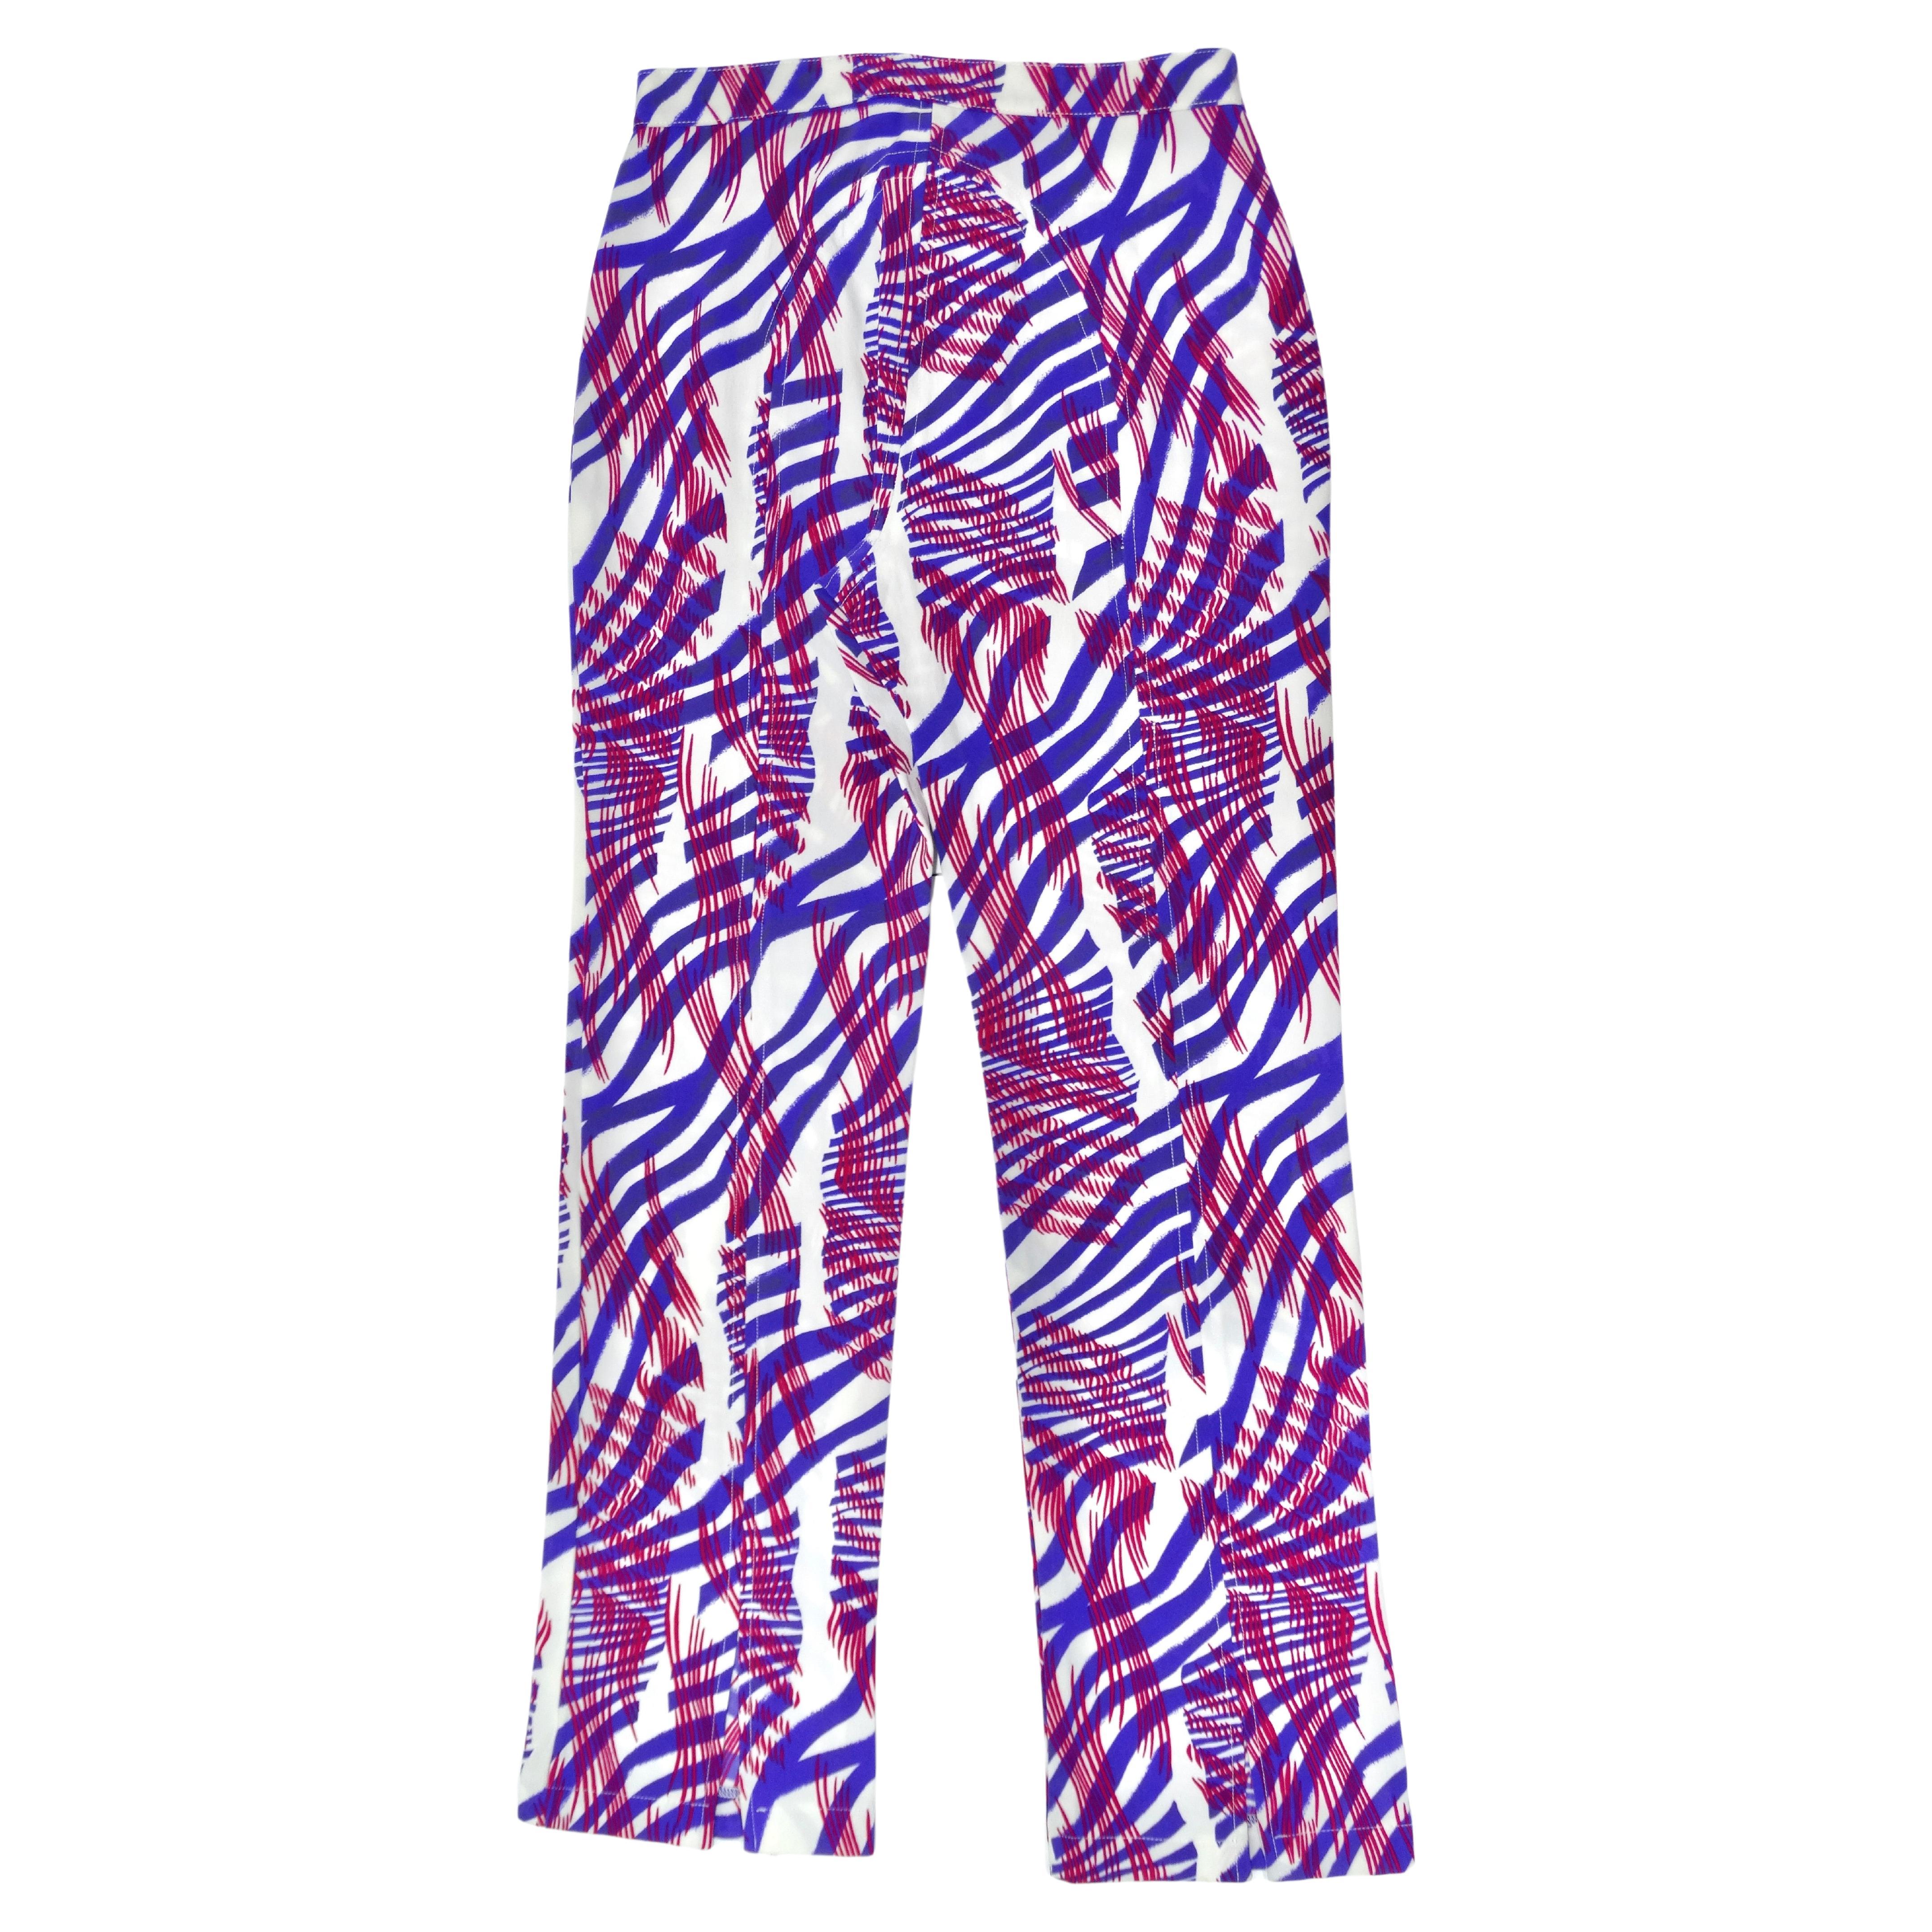 Add a little funky Versace to your closet. This pants include a strechy fabric and button closure with a bold purple and pink striped overlapping pattern. Take these through your everyday life as the fabric will never let you down. Pair these with a